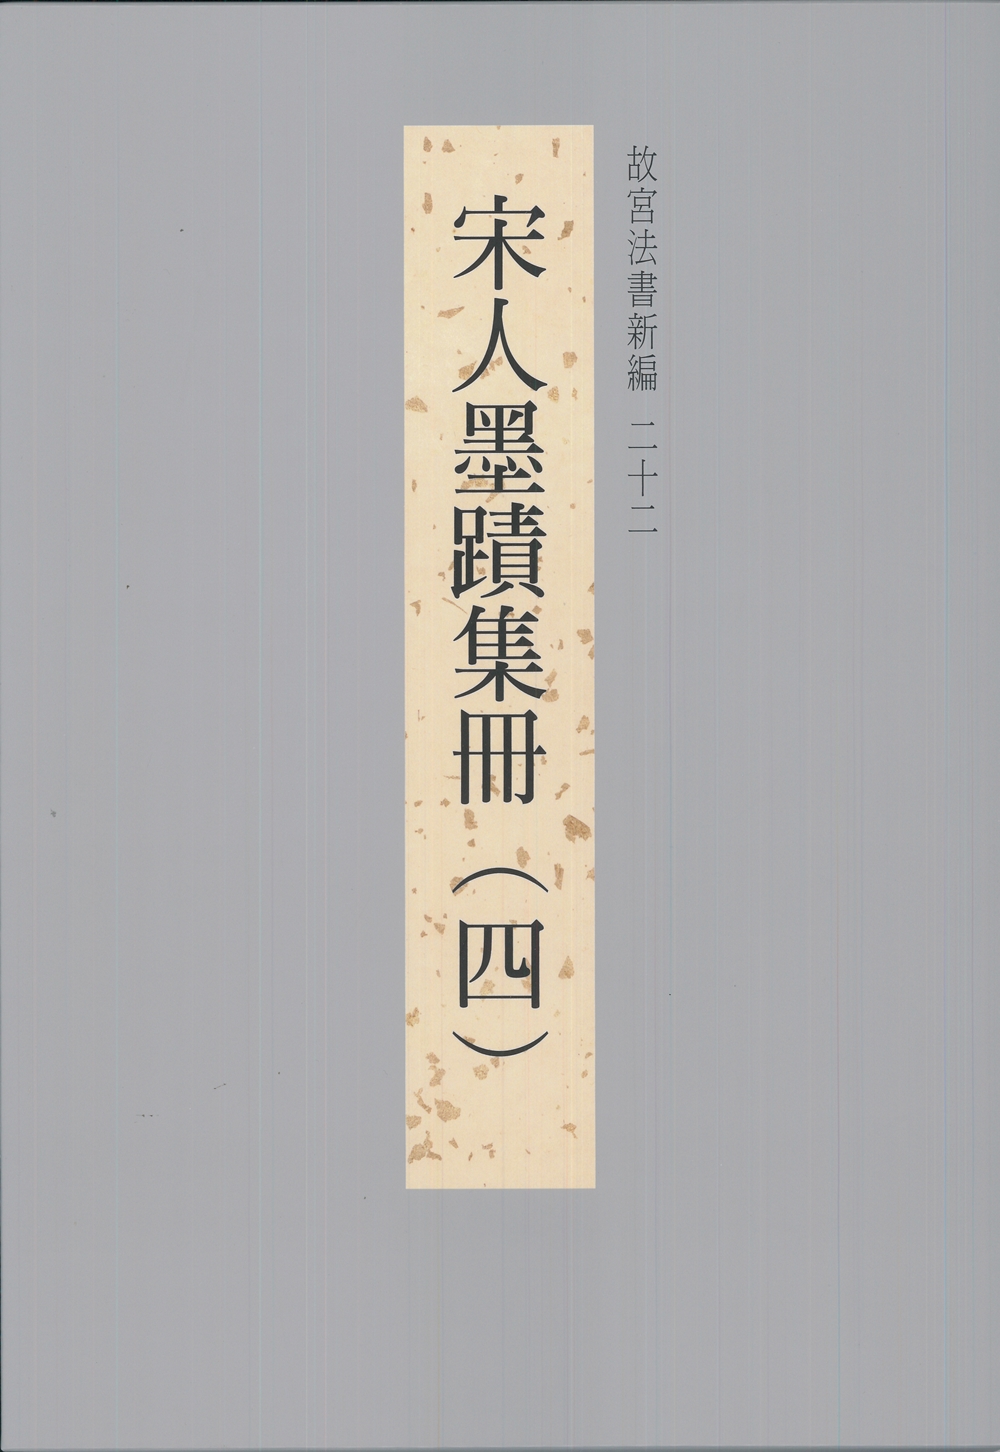 The National Palace Museum's Calligraphy Masterpieces Re-edited (XXII): Calligraphies from the Song Dynasty (Vol. 4) (in Chinese)